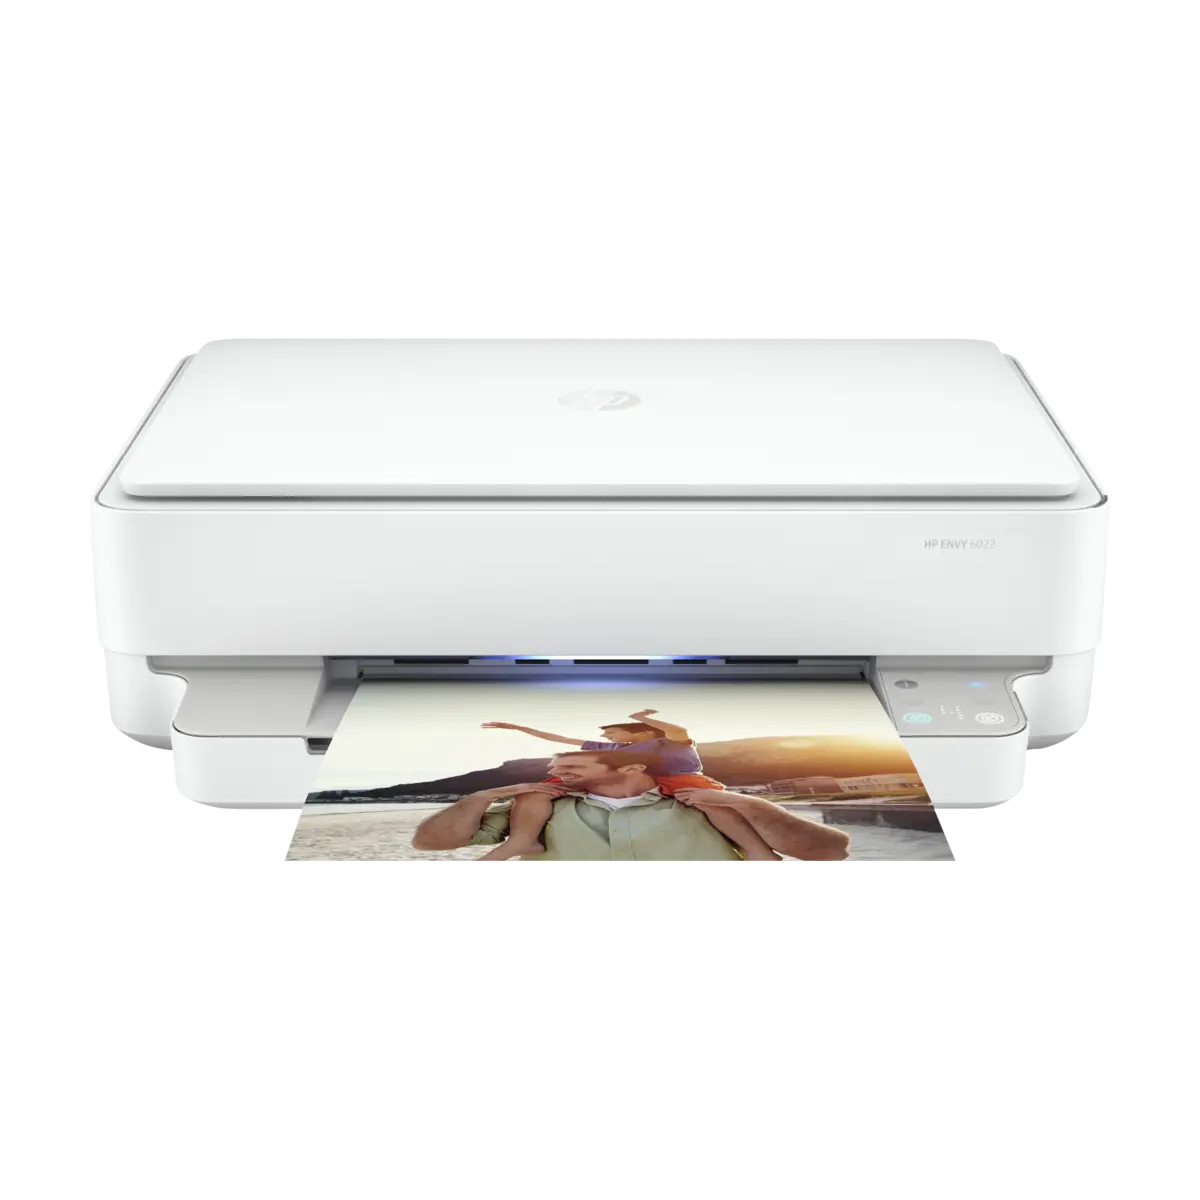 HP ENVY 6022E ALL IN ONE PRINTER YouSee